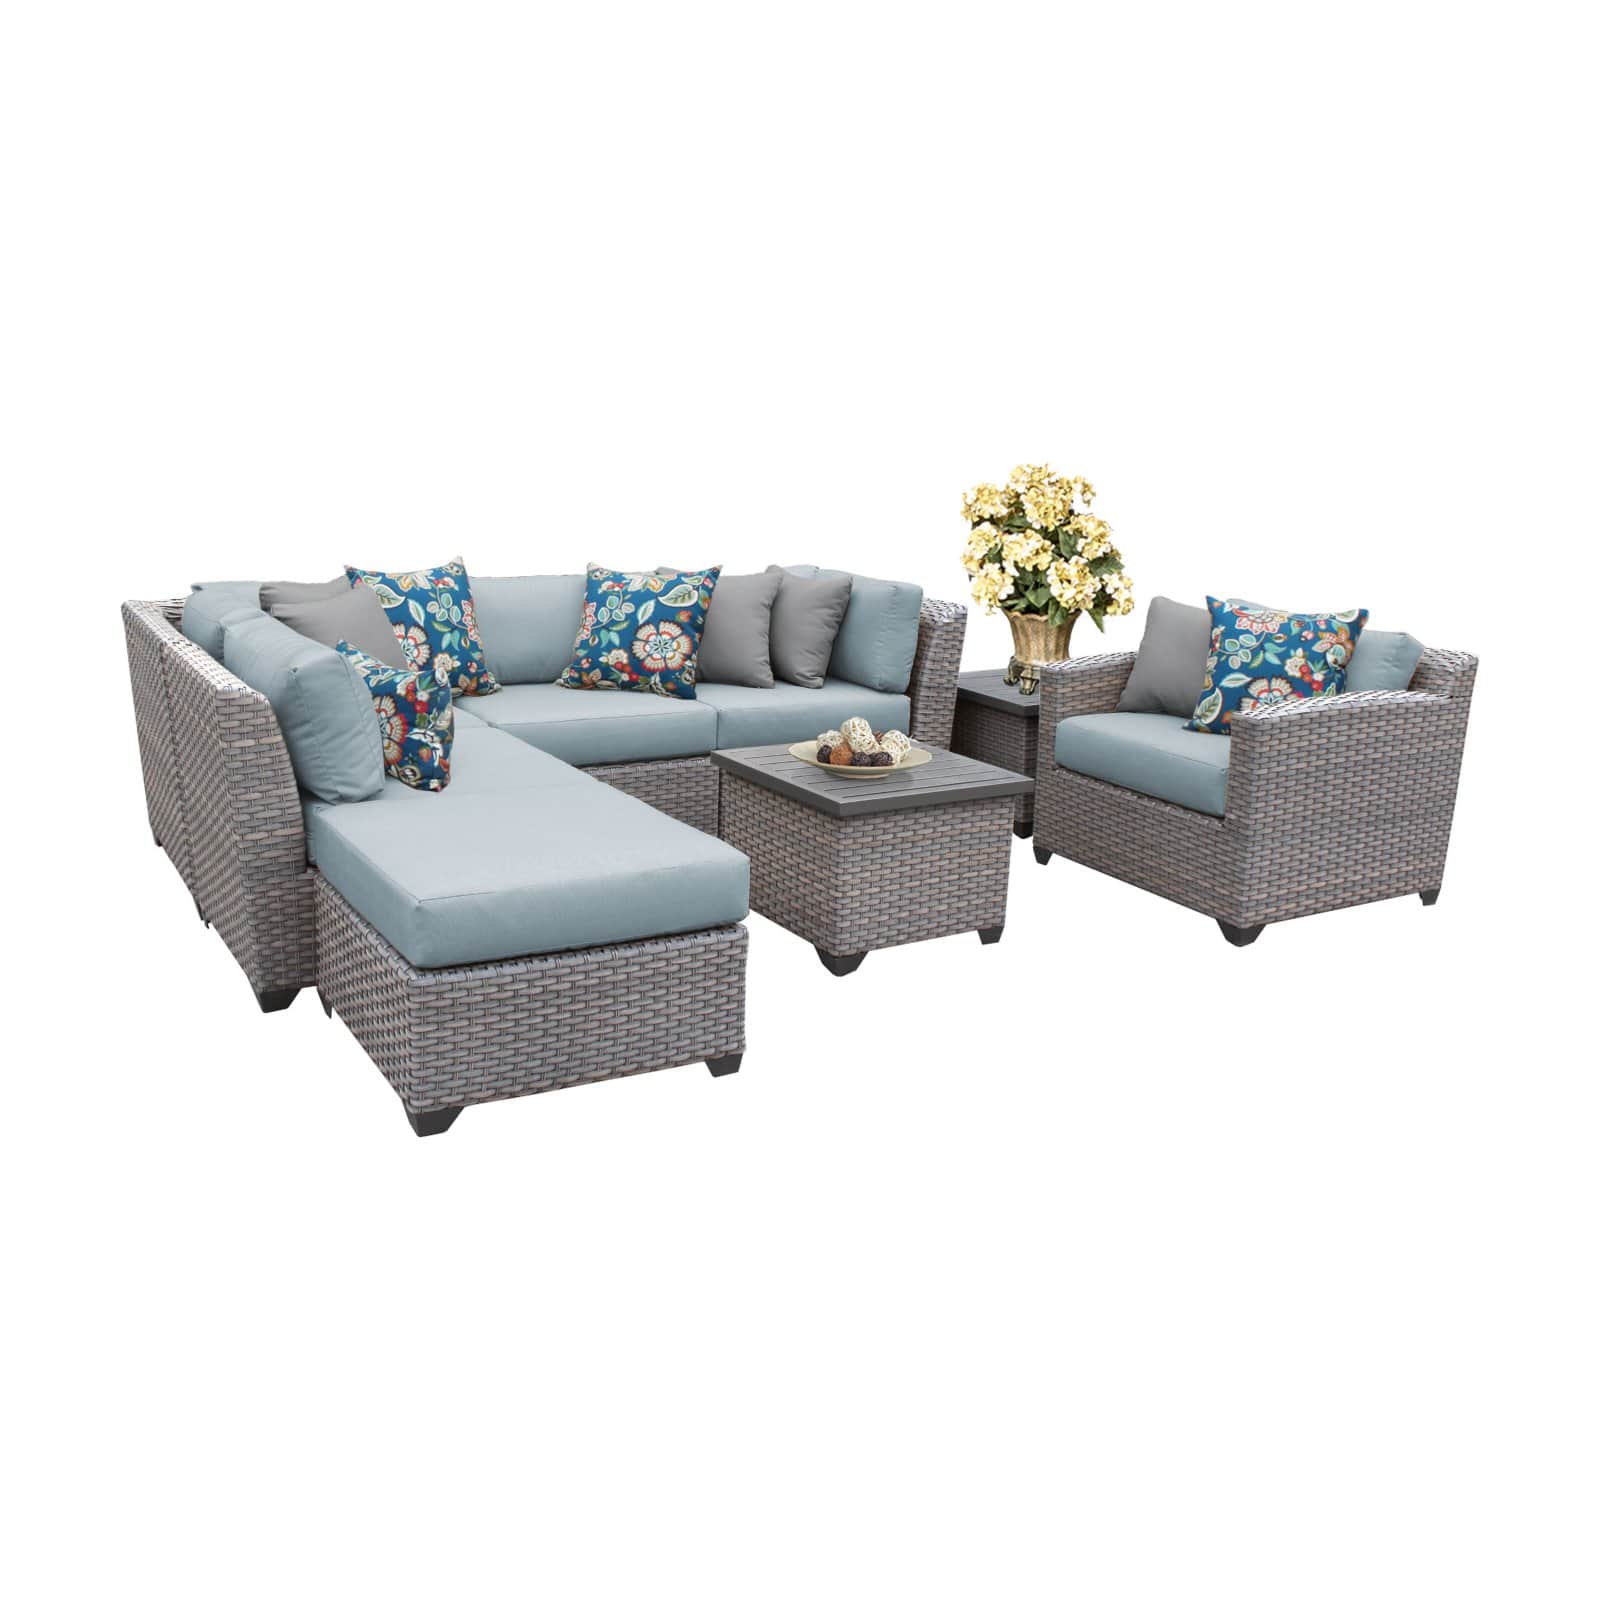 TK Classics Florence Wicker 8 Piece Patio Conversation Set with End Table and 2 Sets of Cushion Covers - image 5 of 11